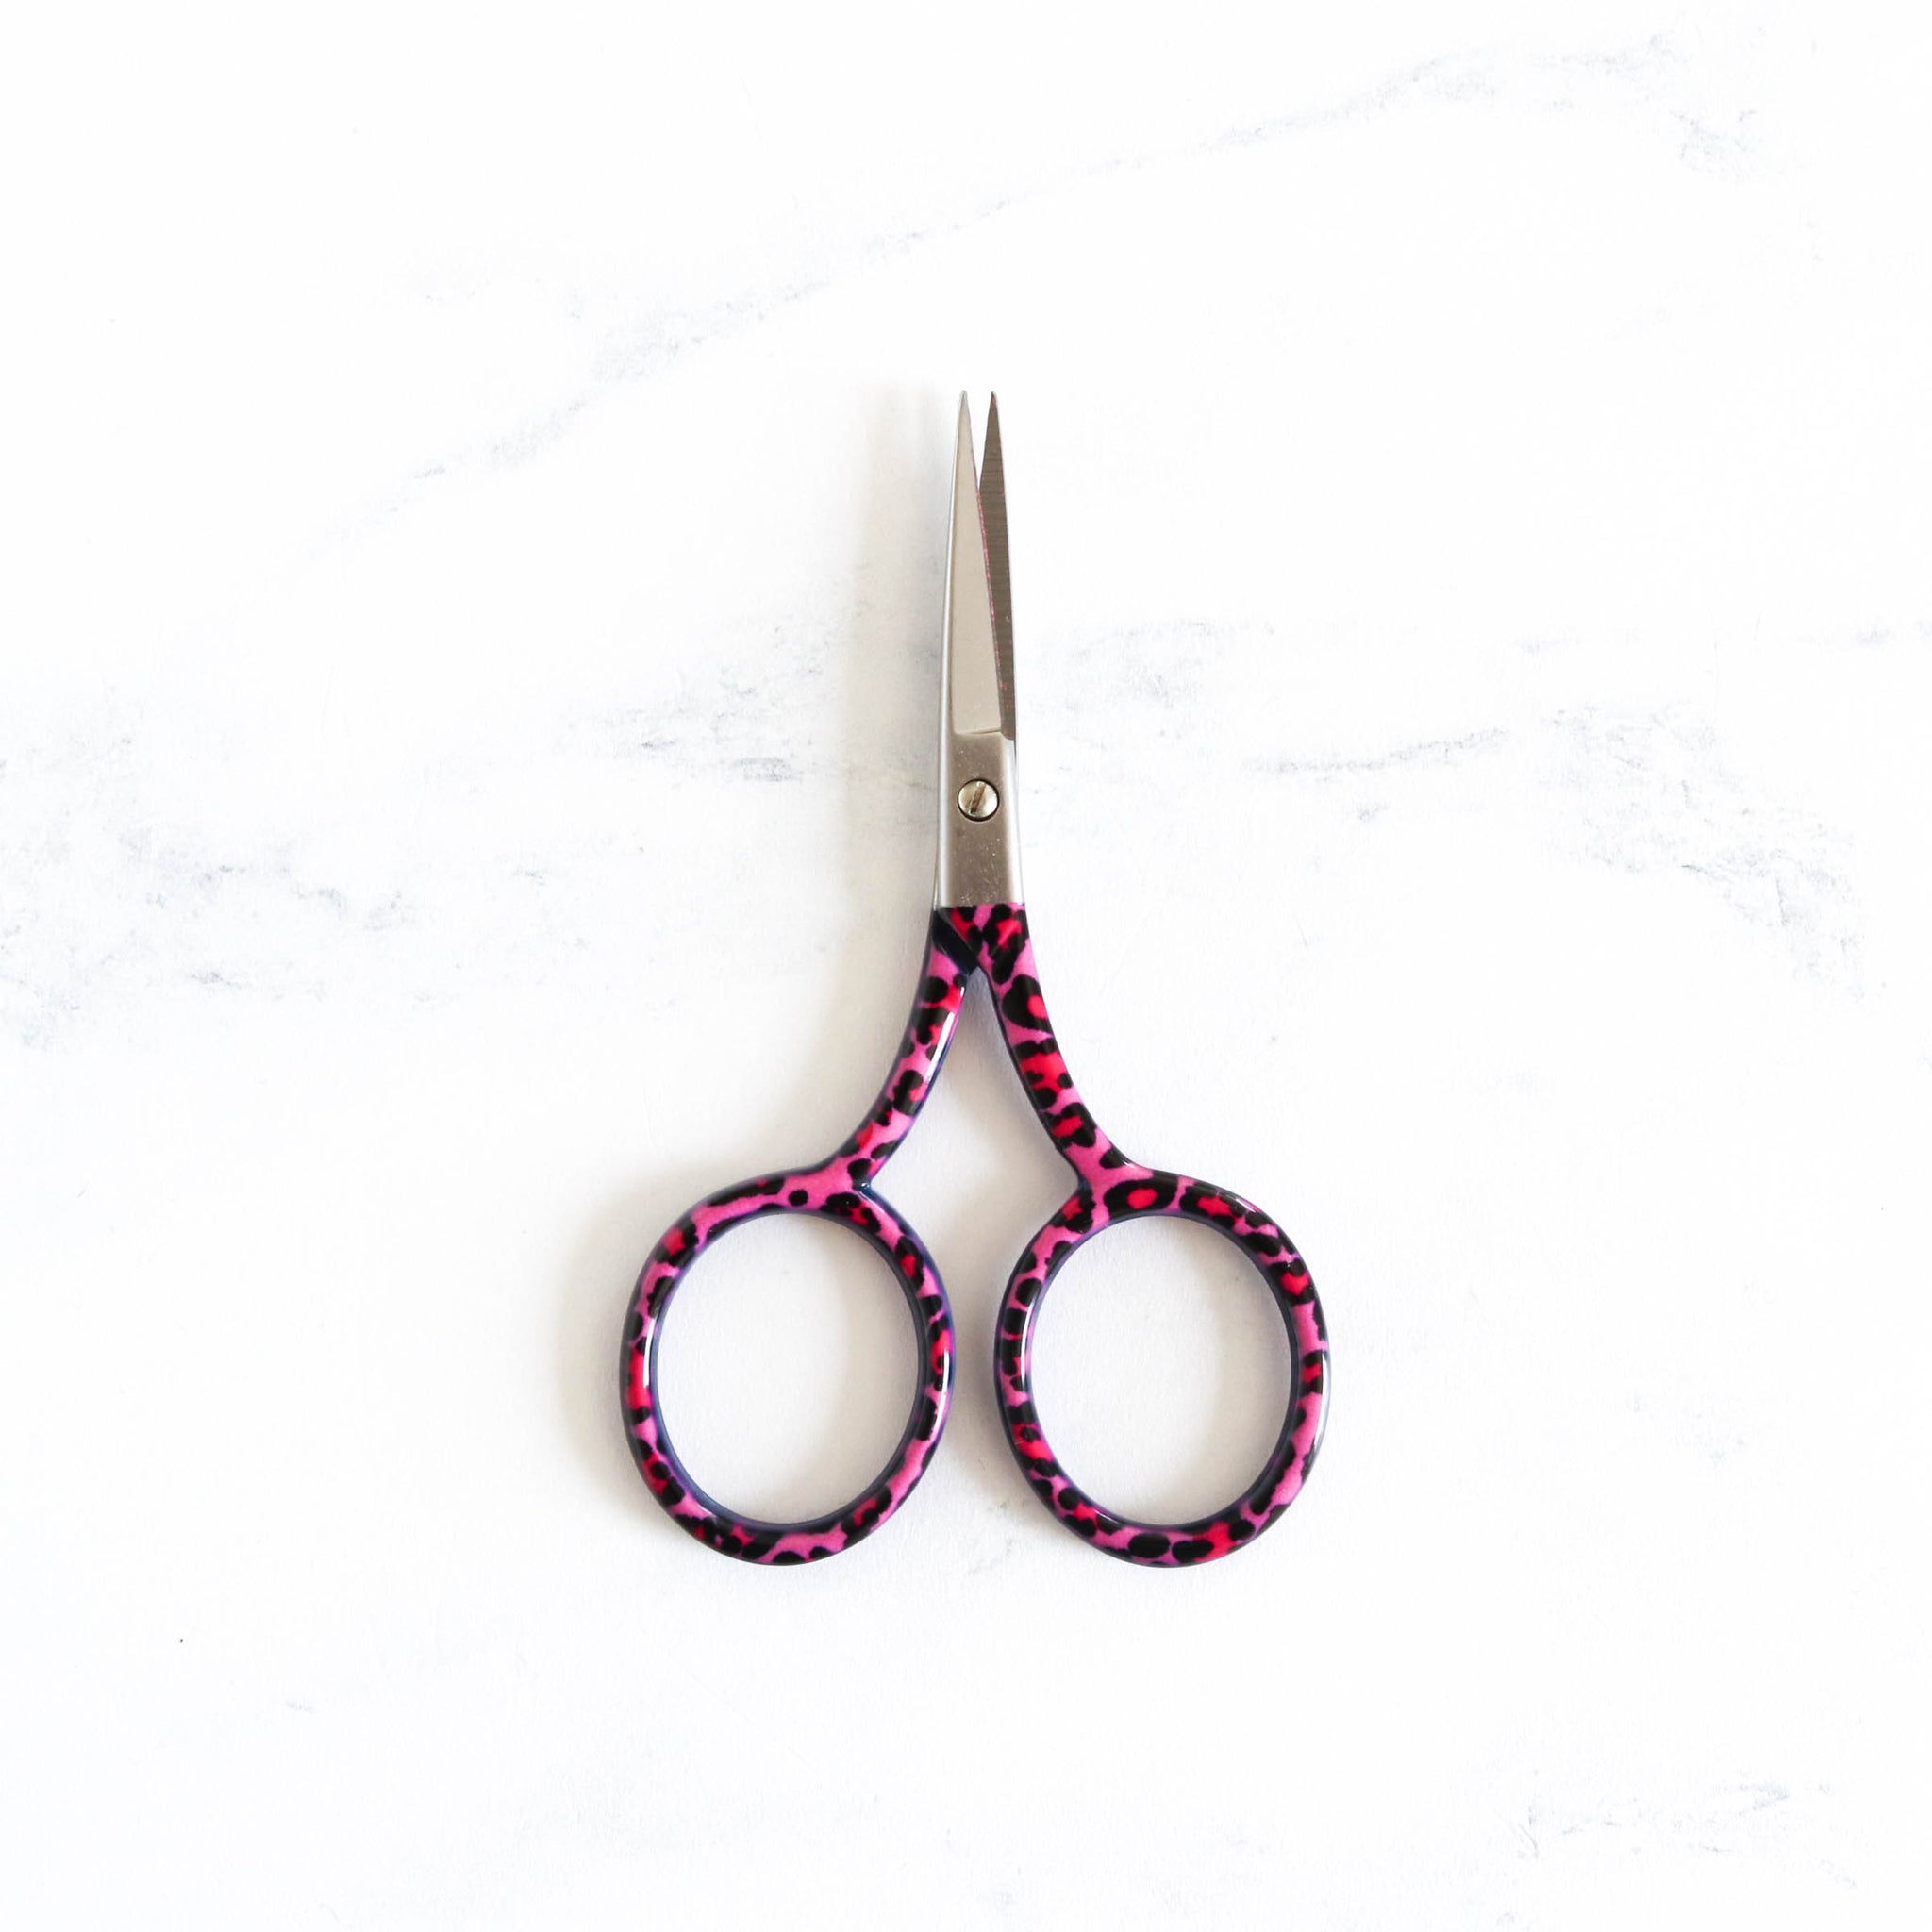 Pink Leopard 3 3/4 Embroidery Scissors